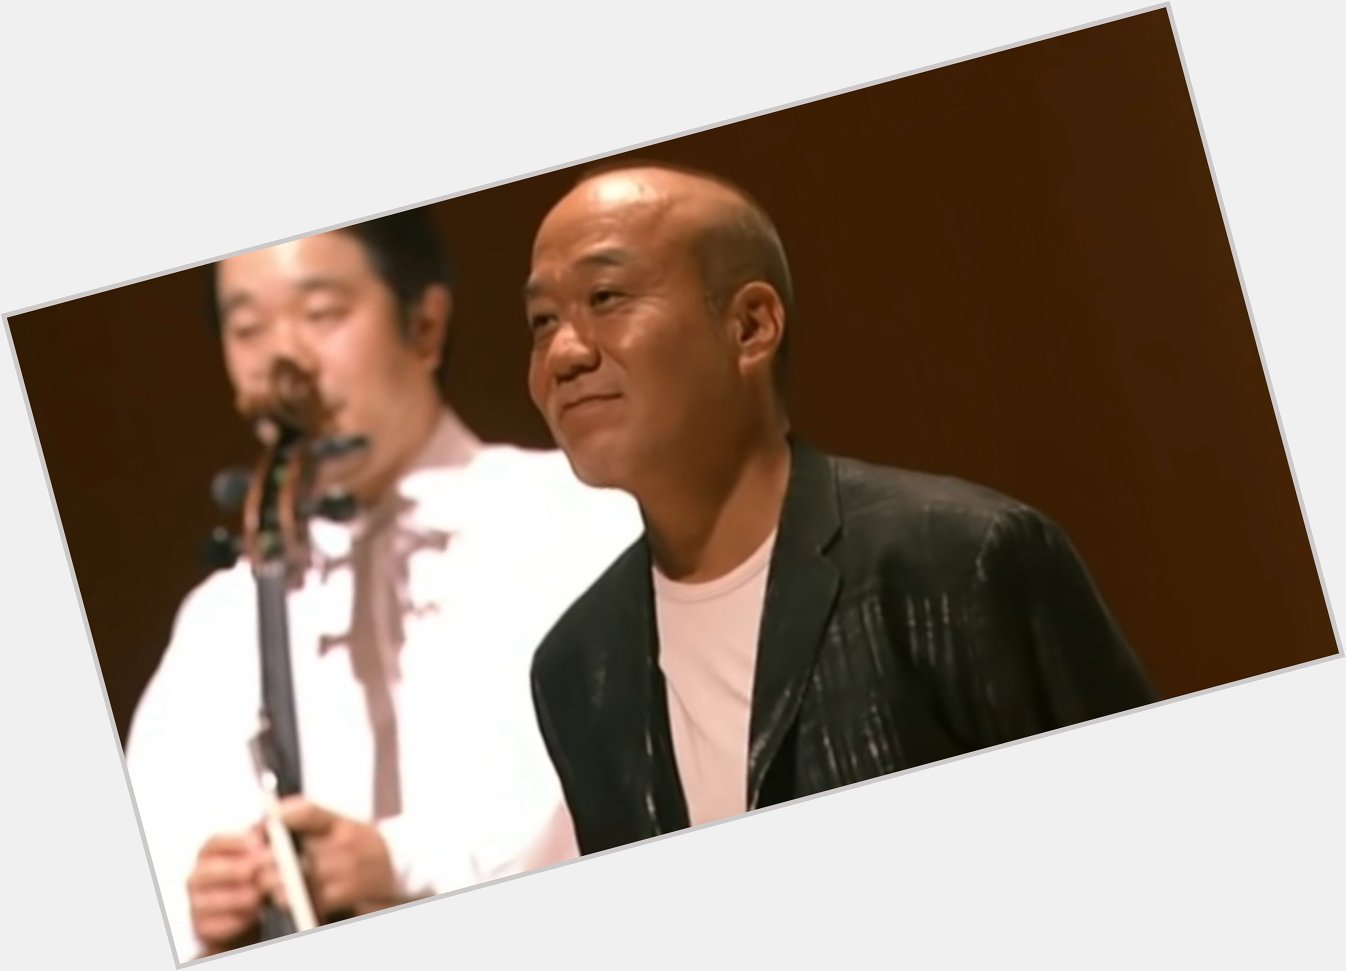 Happy birthday Joe Hisaishi, thank you for allowing the world to hear your art. 